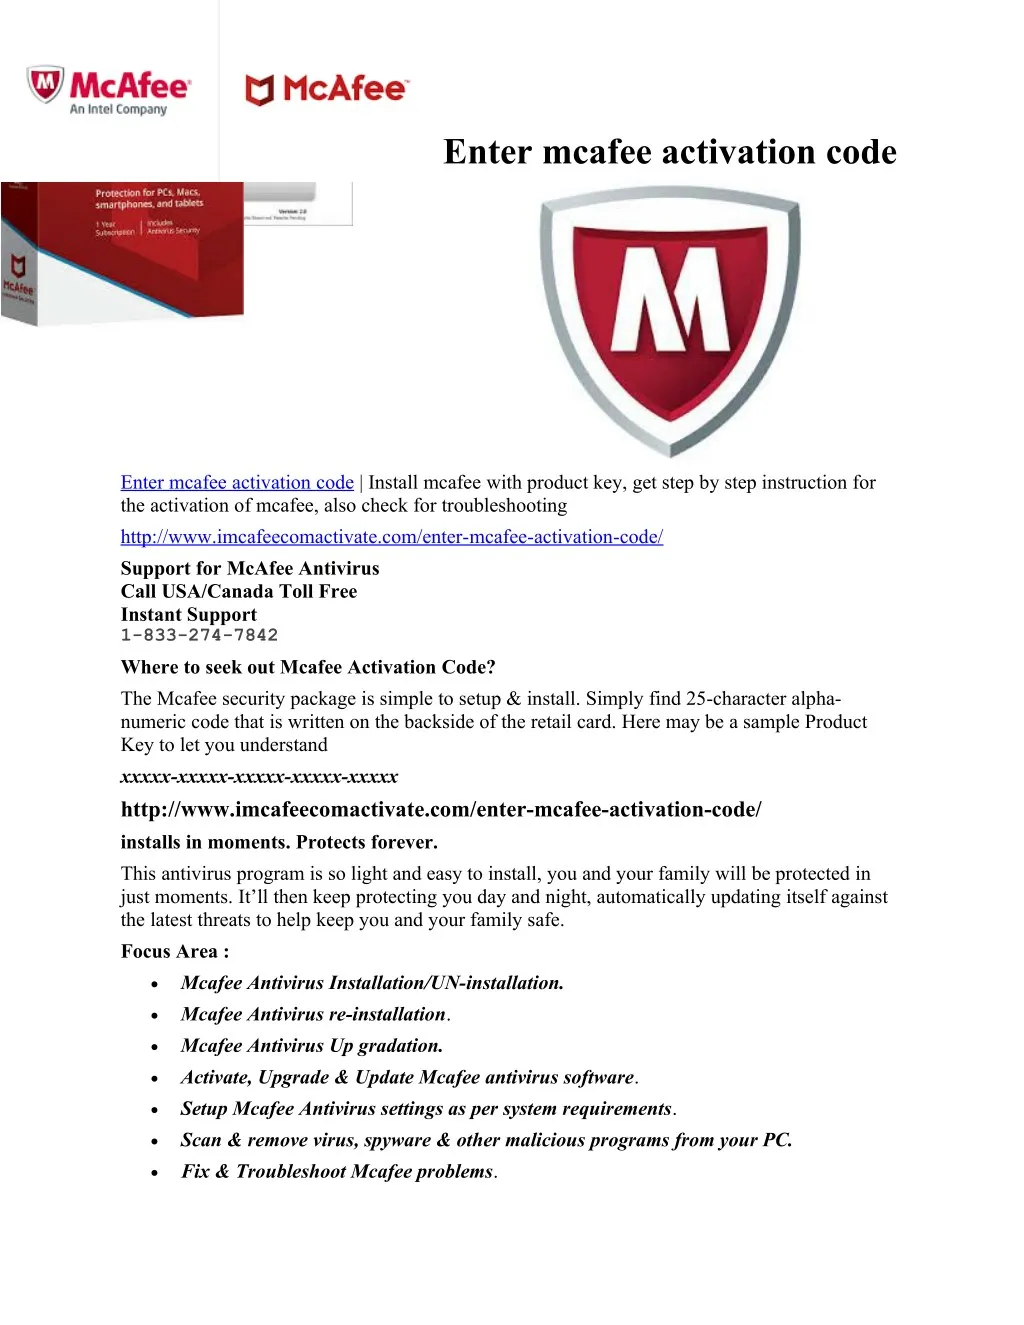 PPT enter mcafee activation code PowerPoint Presentation, free